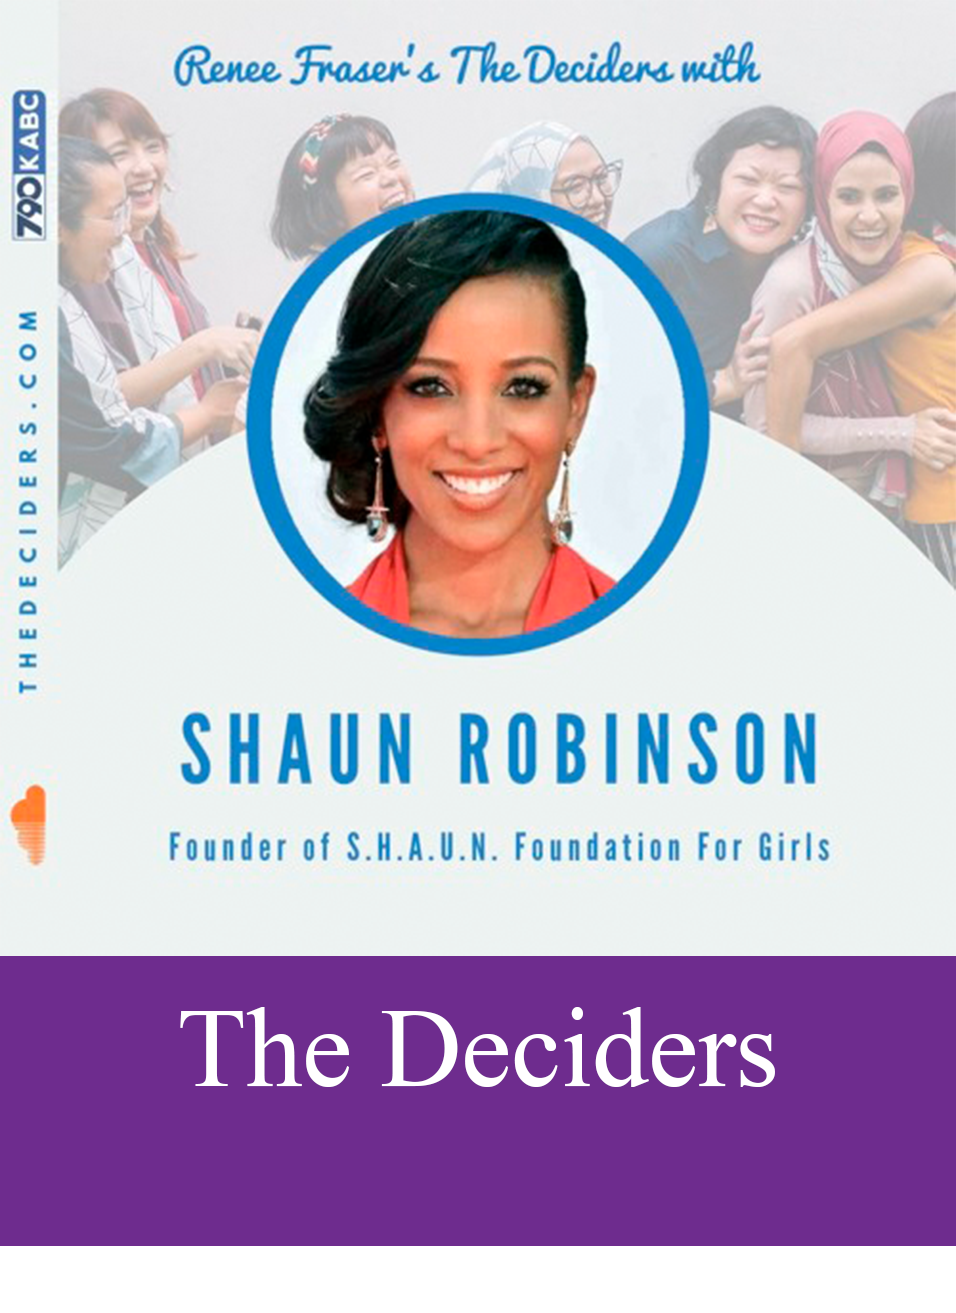 The Deciders with Dr. Renee Fraser